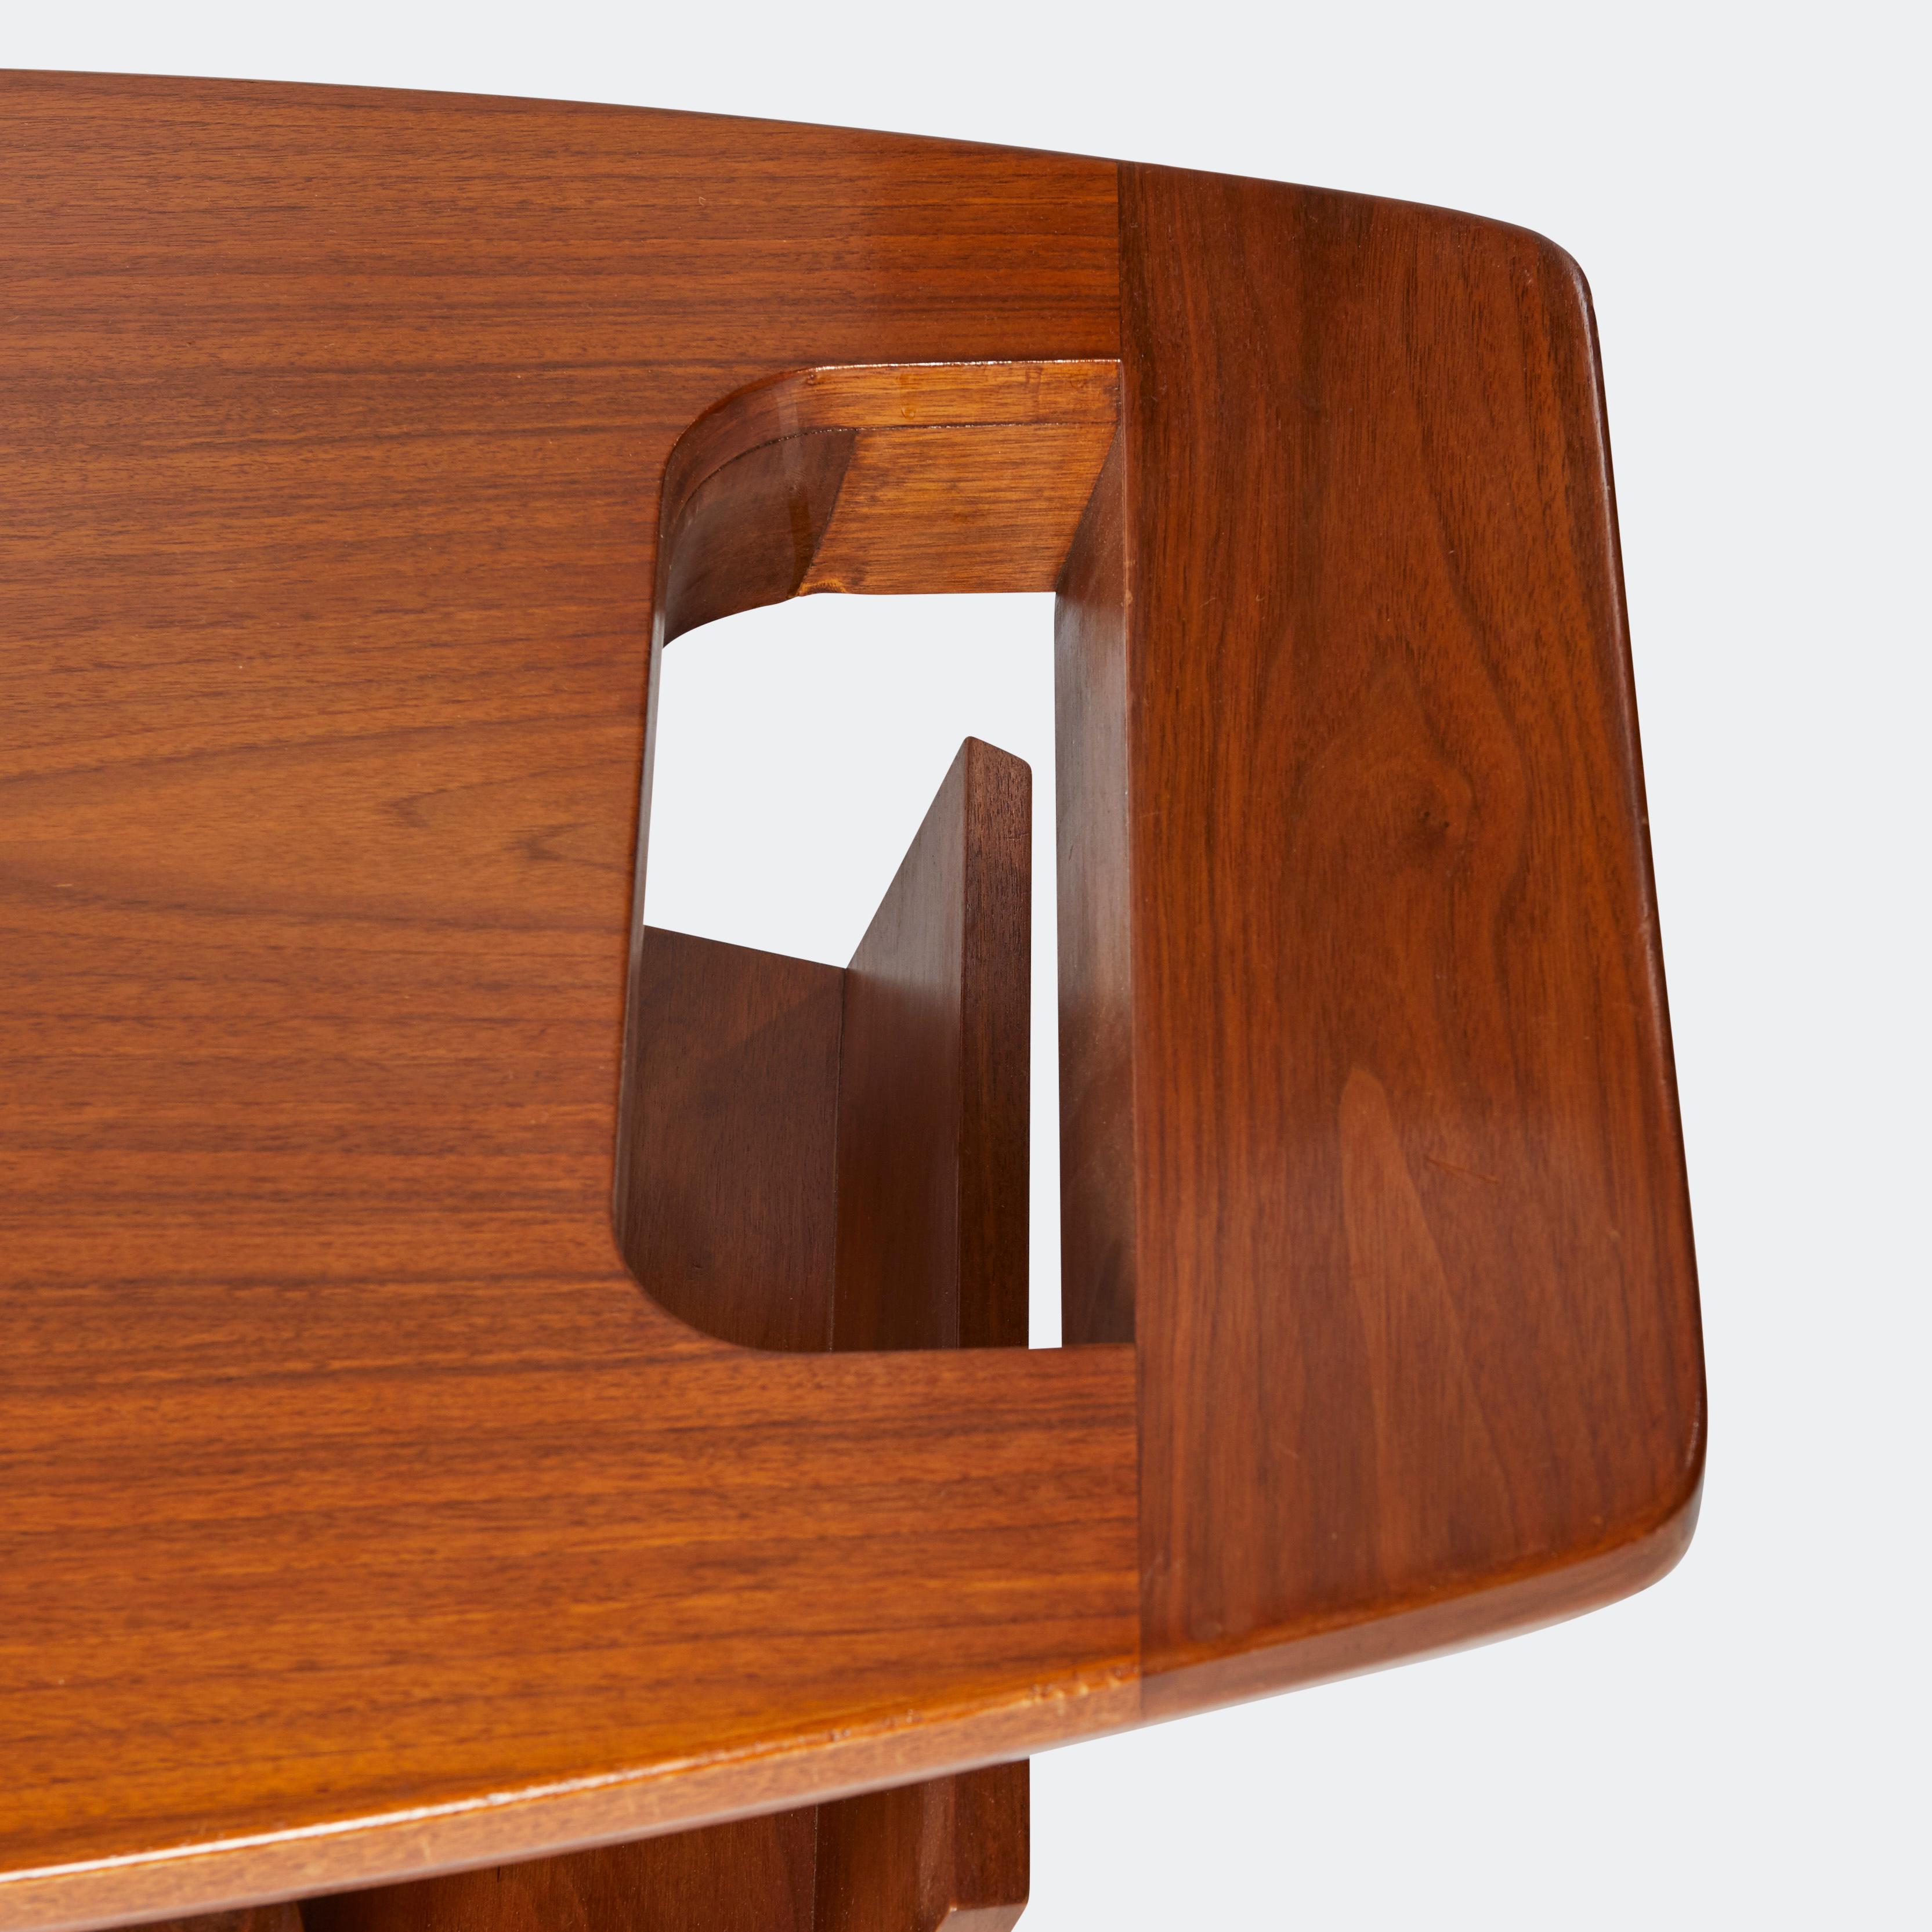 A teak surfboard coffee table, attributed to T.H. Robsjohn-Gibbings. Mid-century modern floating top design with tapered legs, copper stretchers, a handle detail, and an angled side rack. Provenance an interior designed for Arturo Peralta-Ramos, son